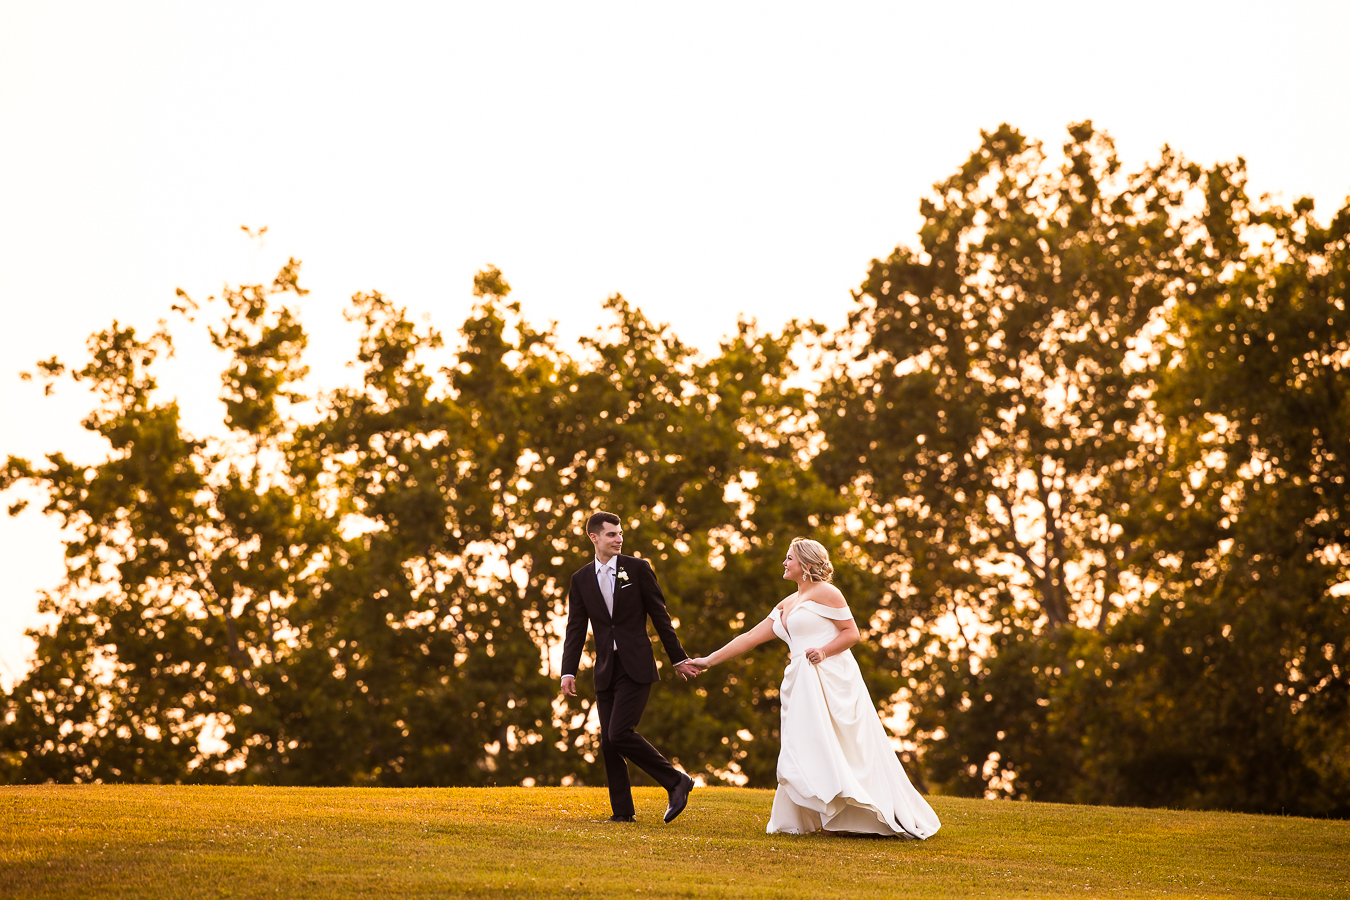 Middleburg Barn Wedding Photographer, rhinehart photography, captures this candid, creative image of the bride and groom as they run across and open field holding hands during their wedding in virginia